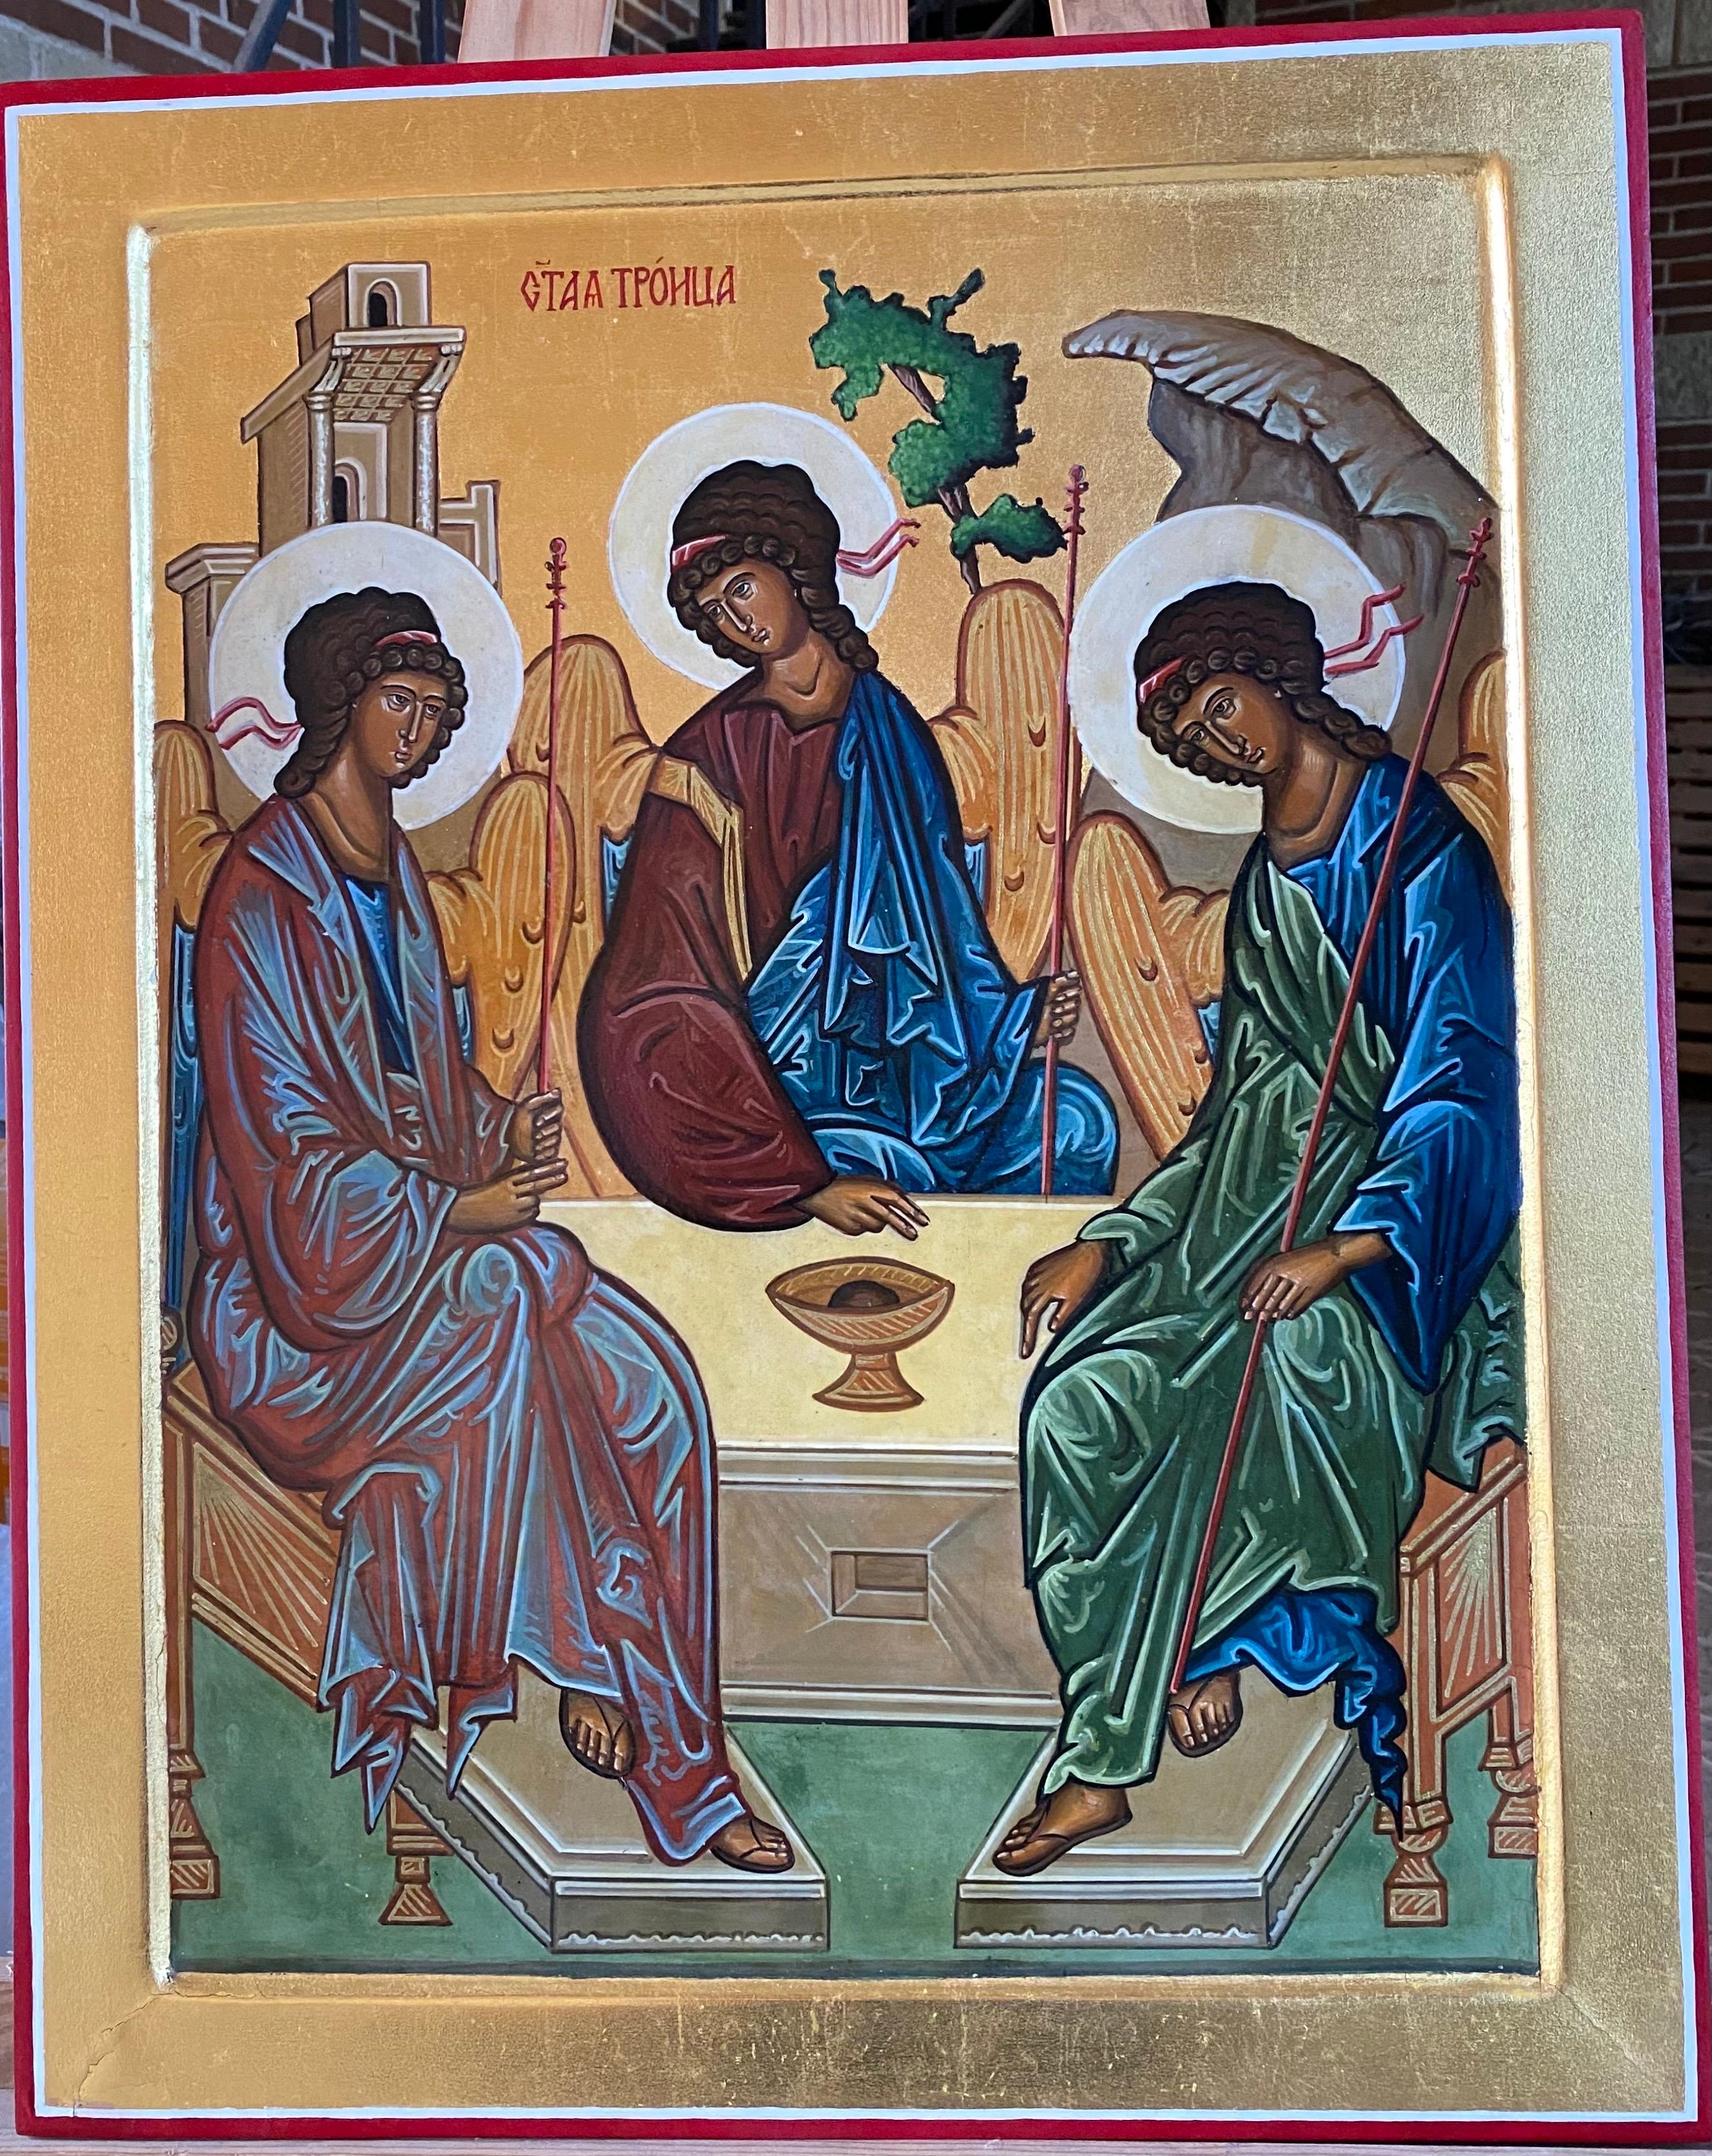 Oliver Samsinger Figurative Painting - The Holy Trinity, after an icon by Russian painter Andrei Rublev (15th century)